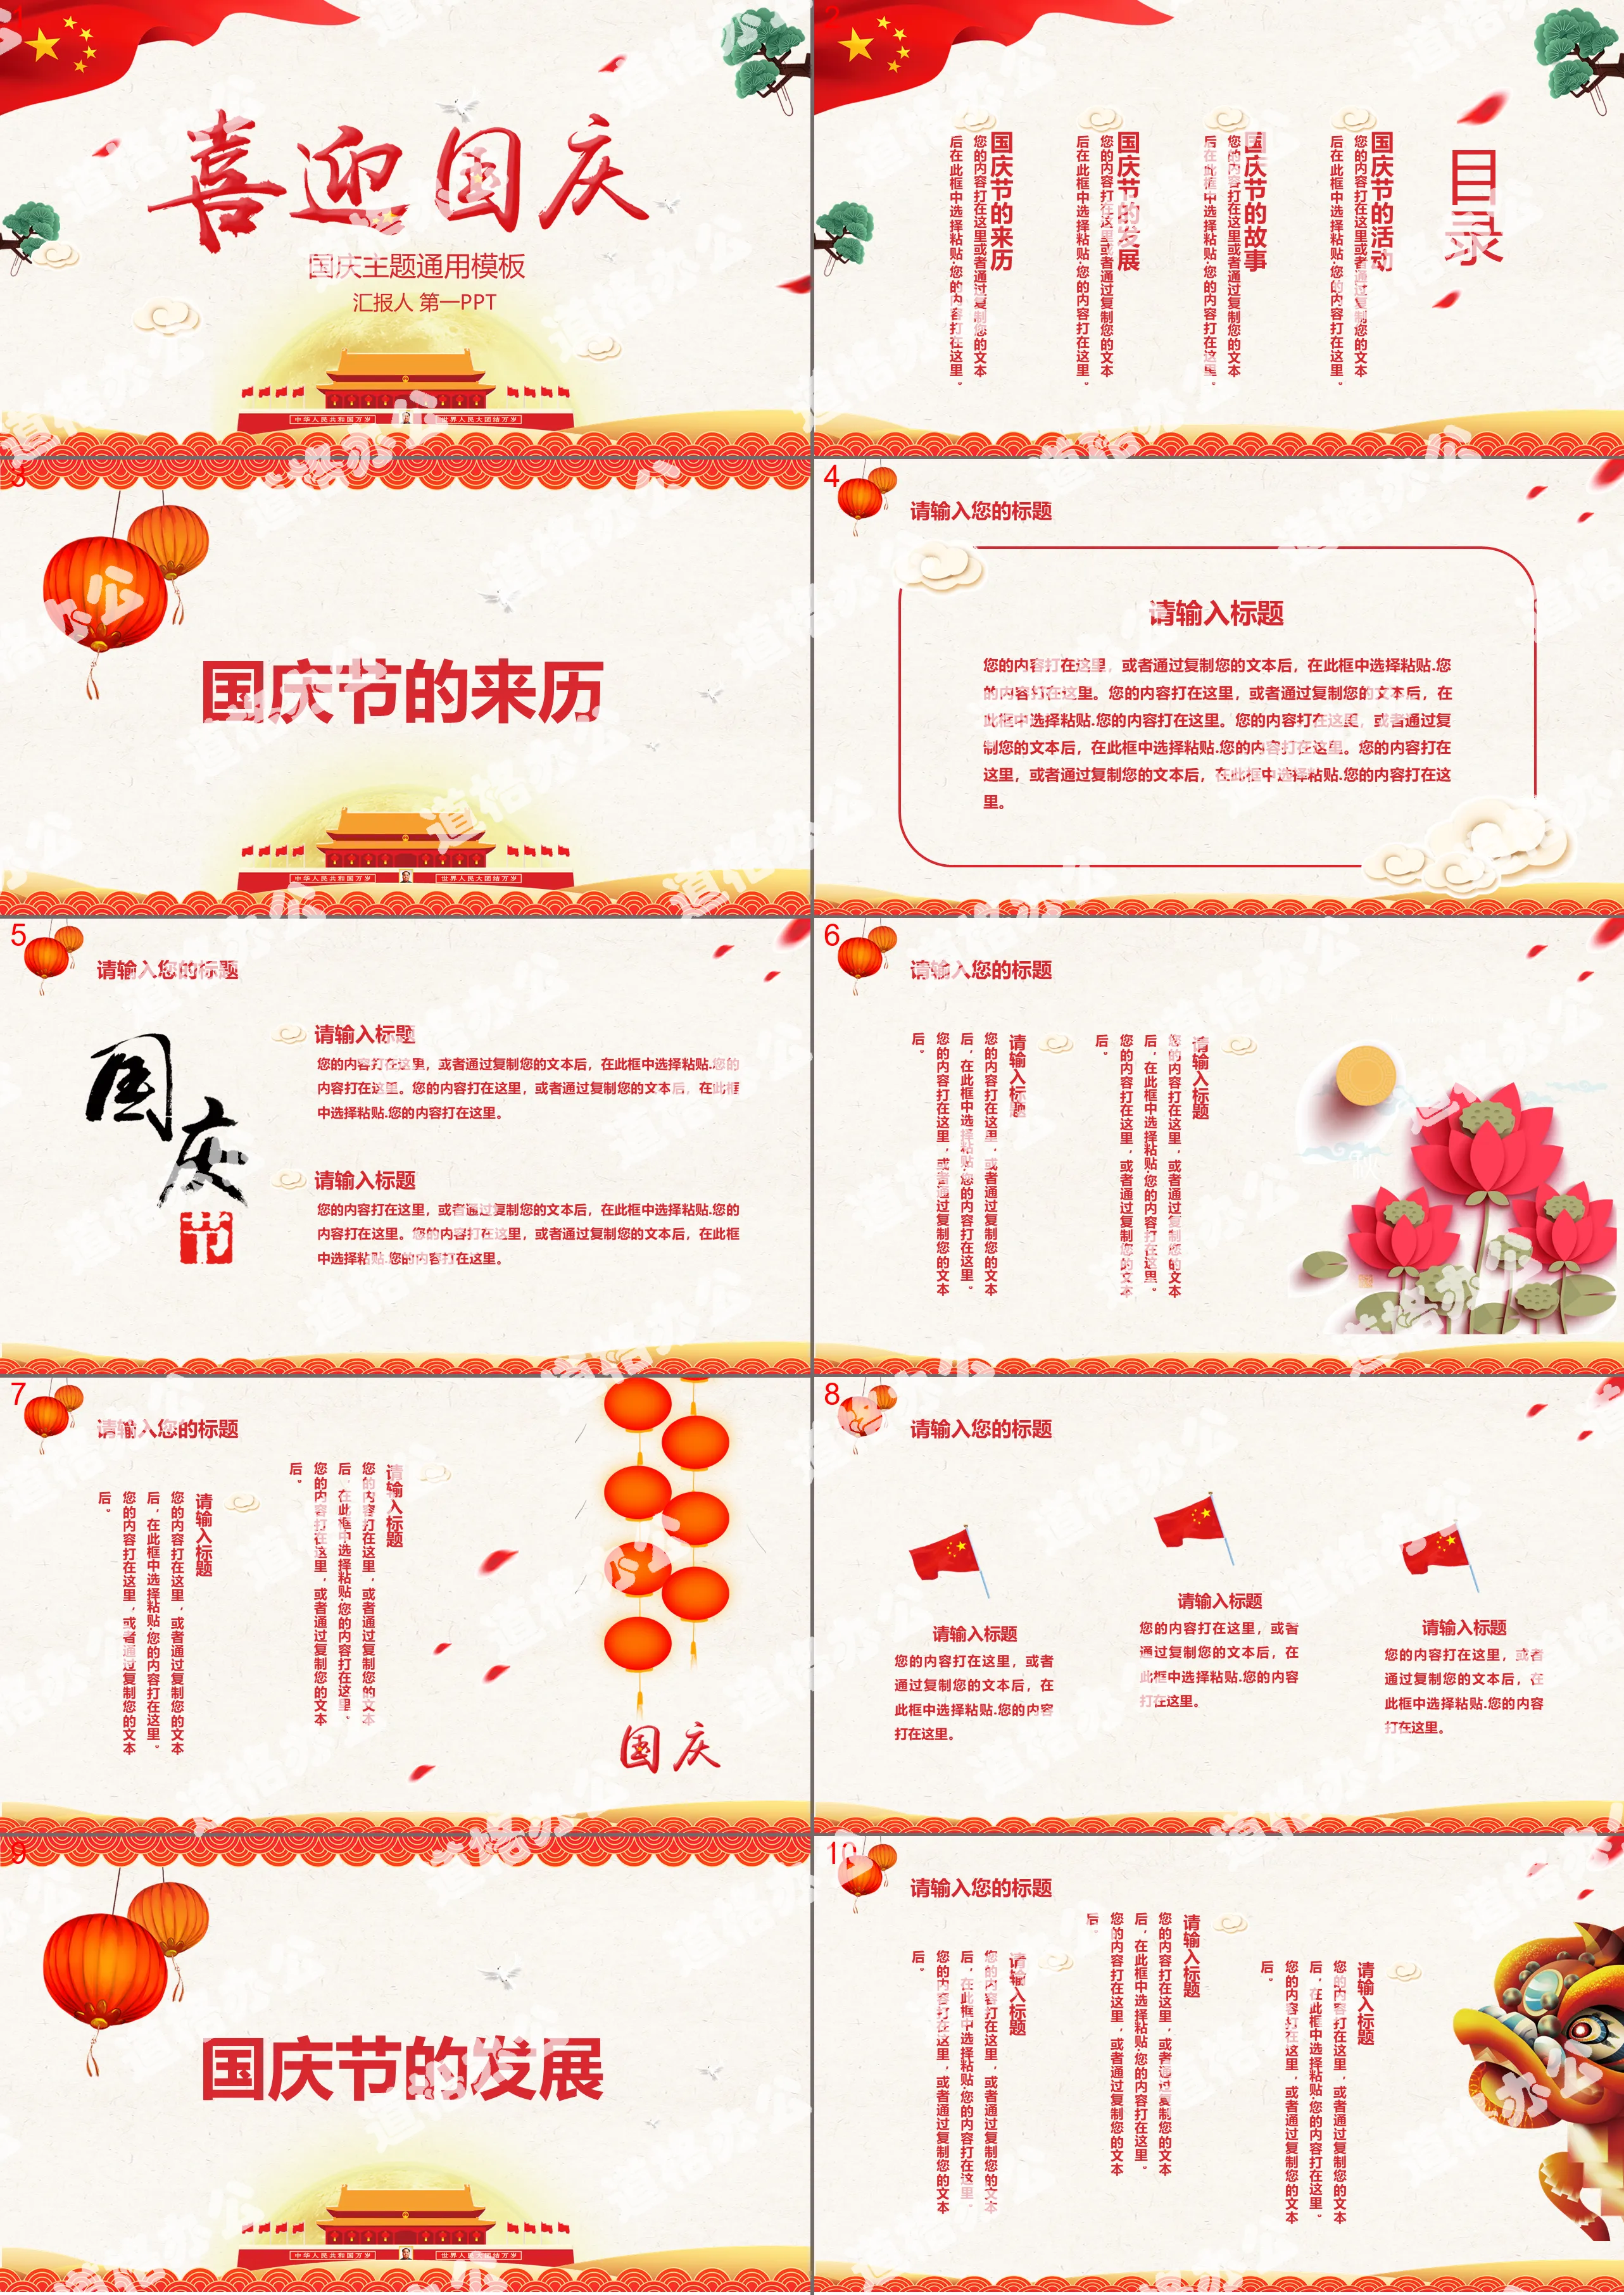 "Welcome to the National Day" Eleventh National Day PPT template